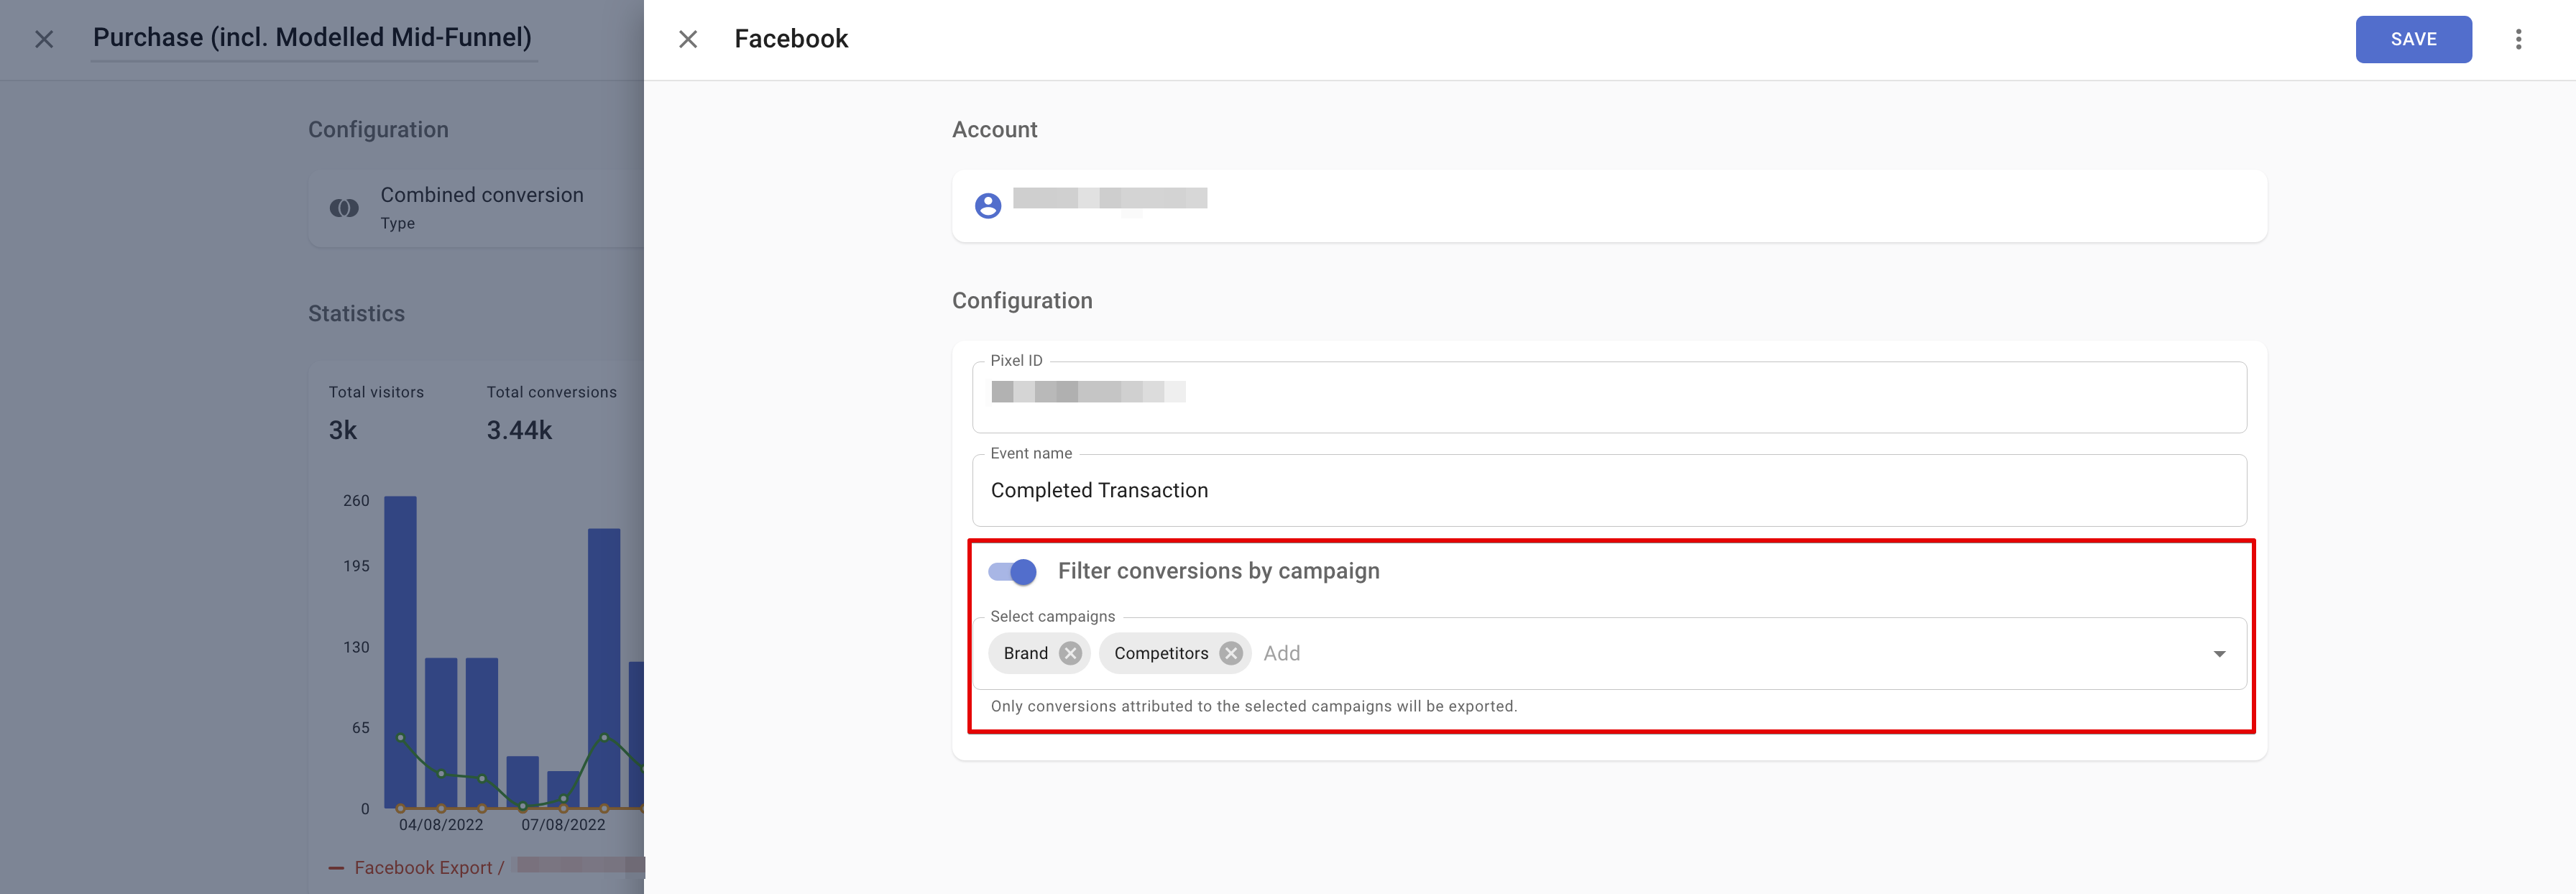 Campaign filter in Conversion export